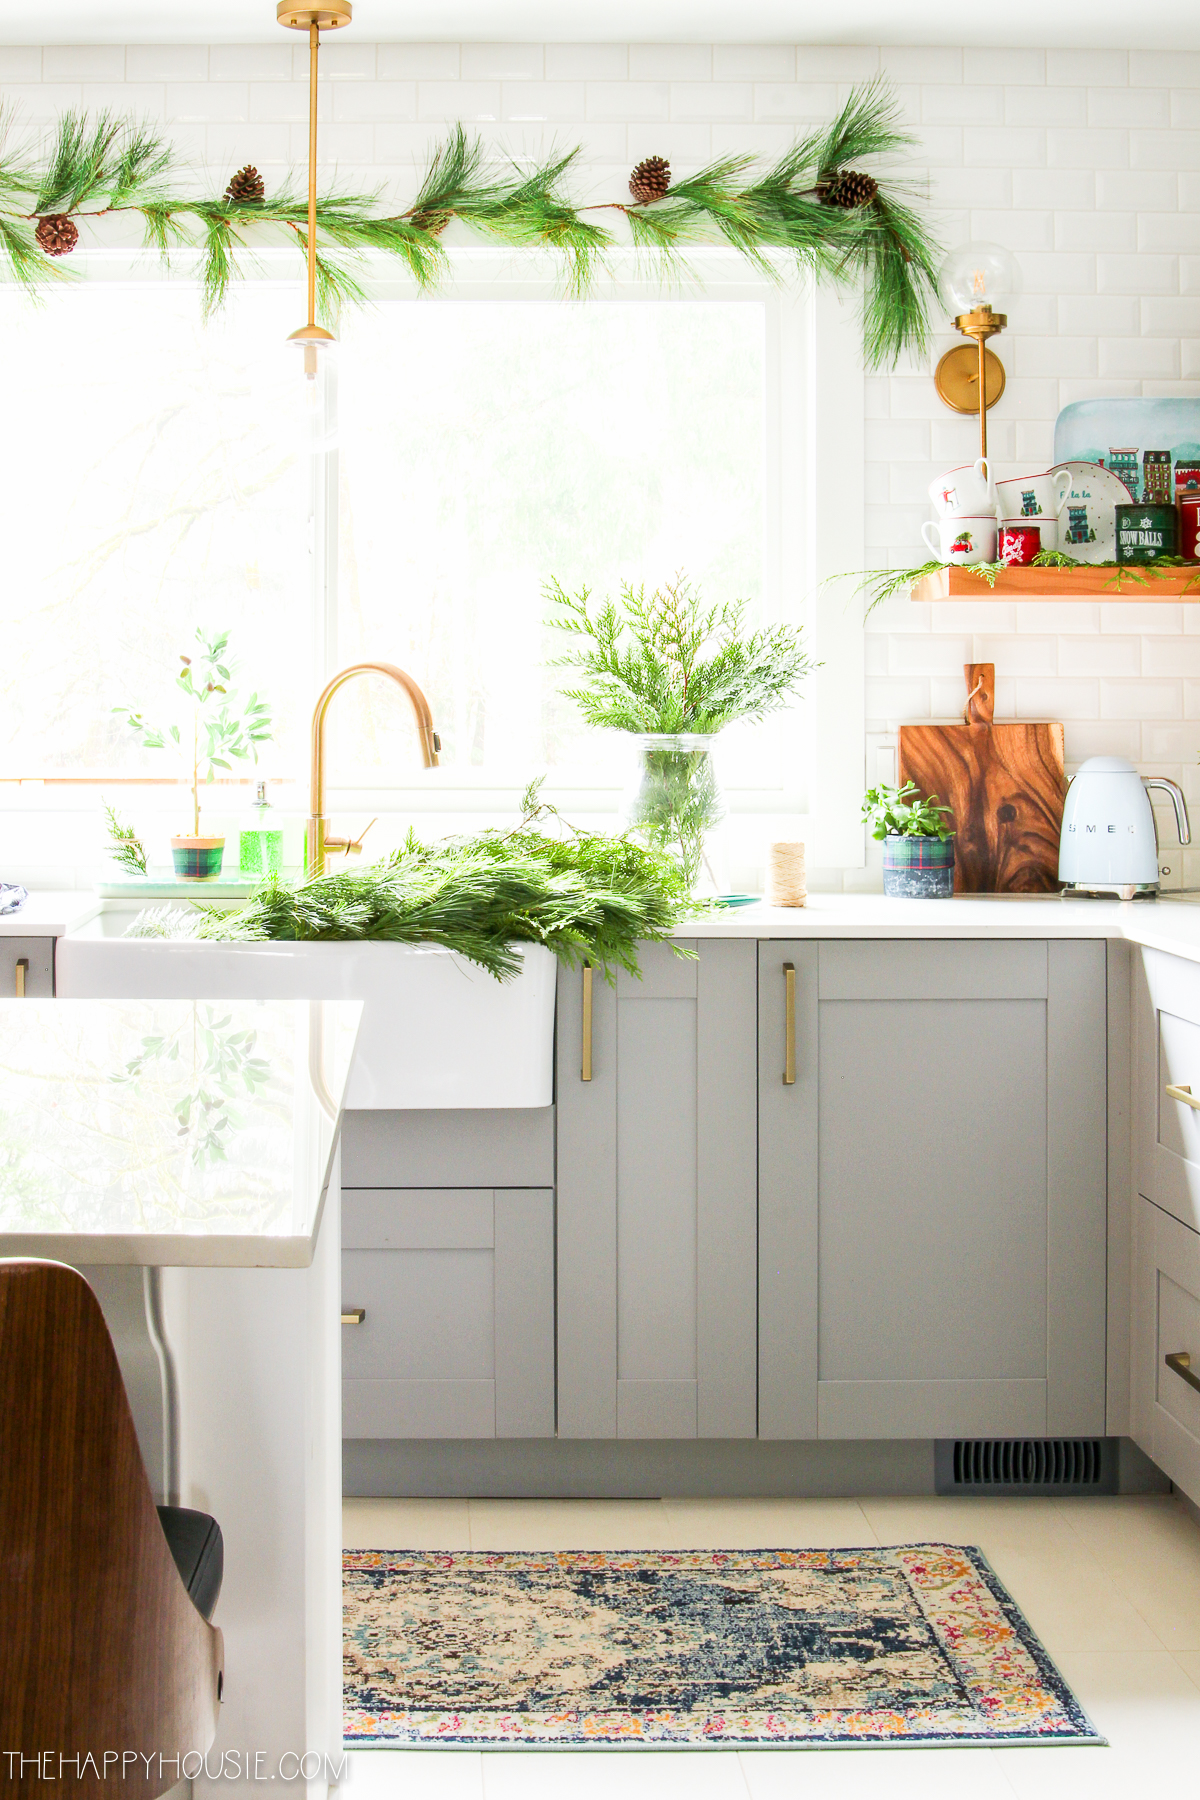 There are gold pulls on the cabinets. A fresh greenery of garland is around the kitchen window.